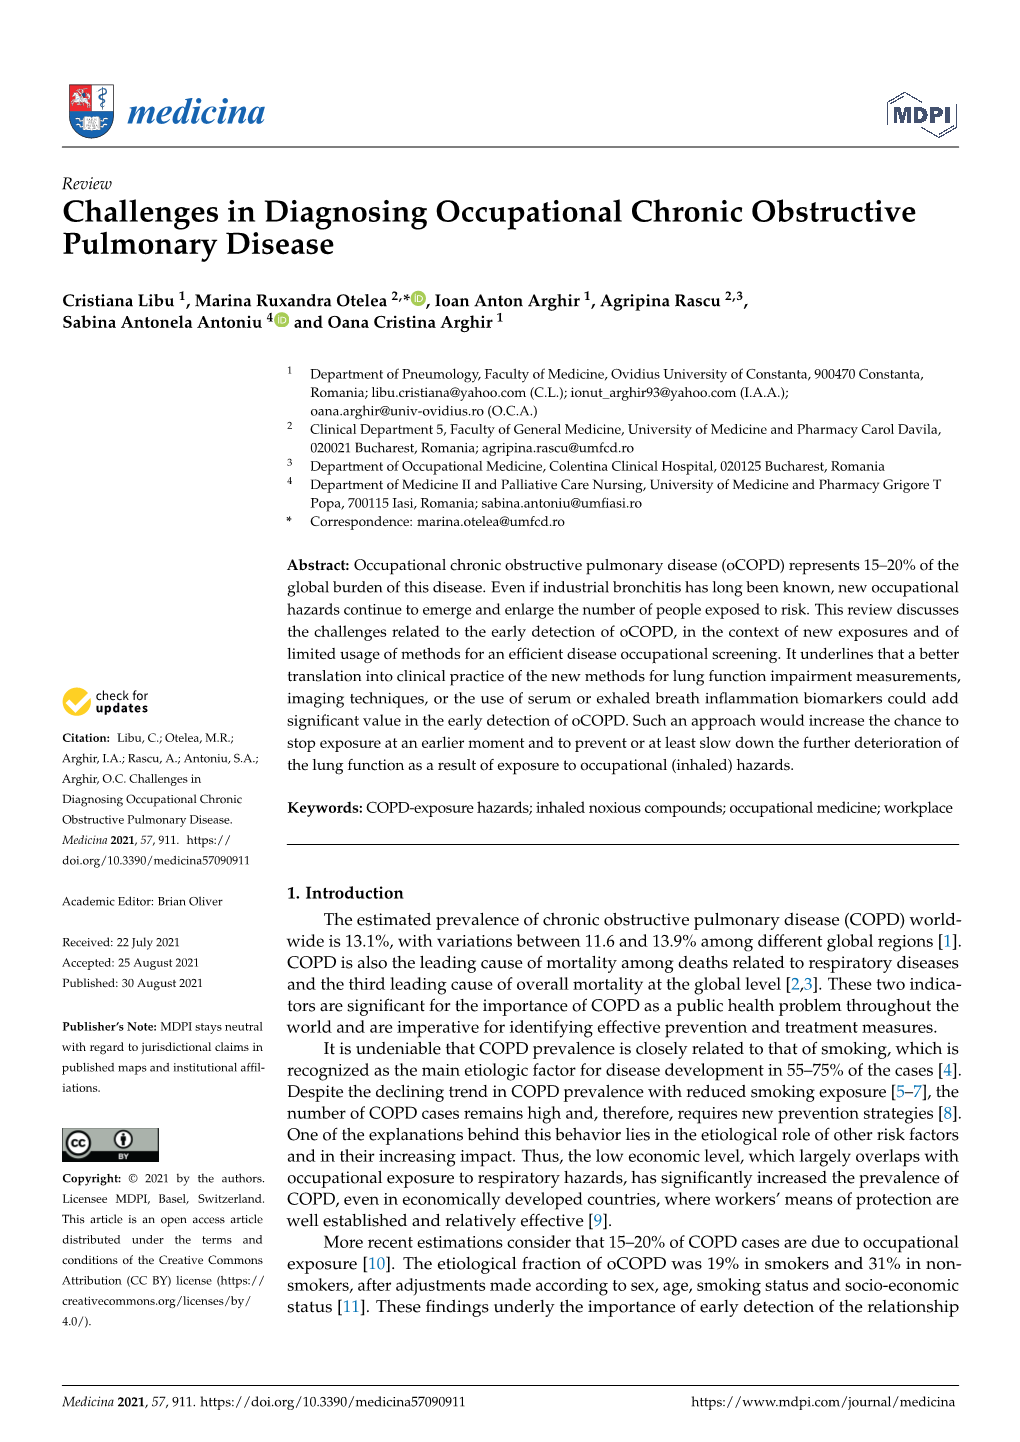 Challenges in Diagnosing Occupational Chronic Obstructive Pulmonary Disease